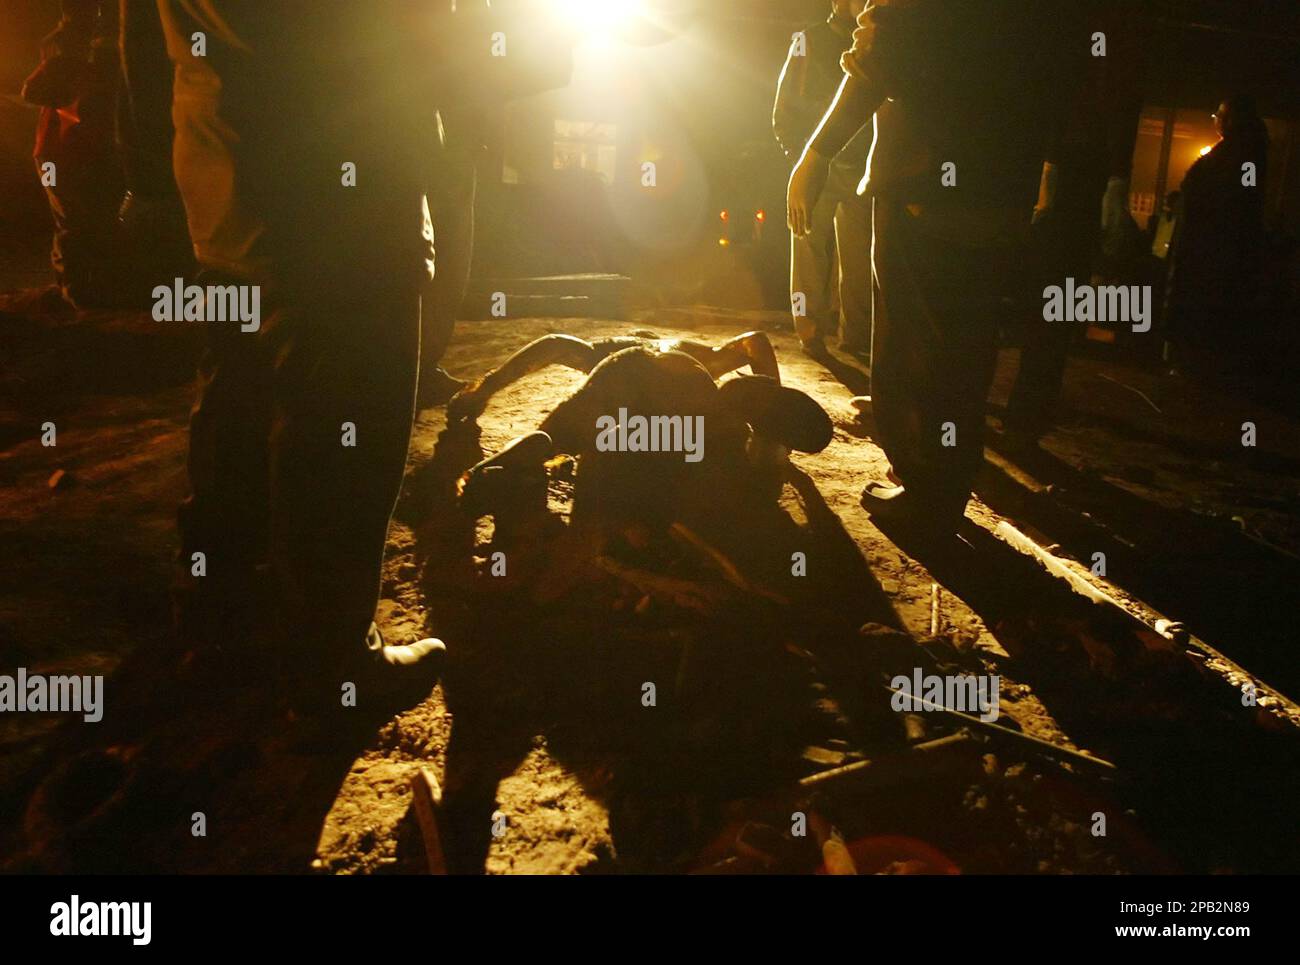 EDS NOTE: GRAPHIC CONTENT ** Rescue workers stand next to a body of a  victim of a furnace explosion at a Kenyan factory on the outskirts of  Nairobi, Kenya on Monday,